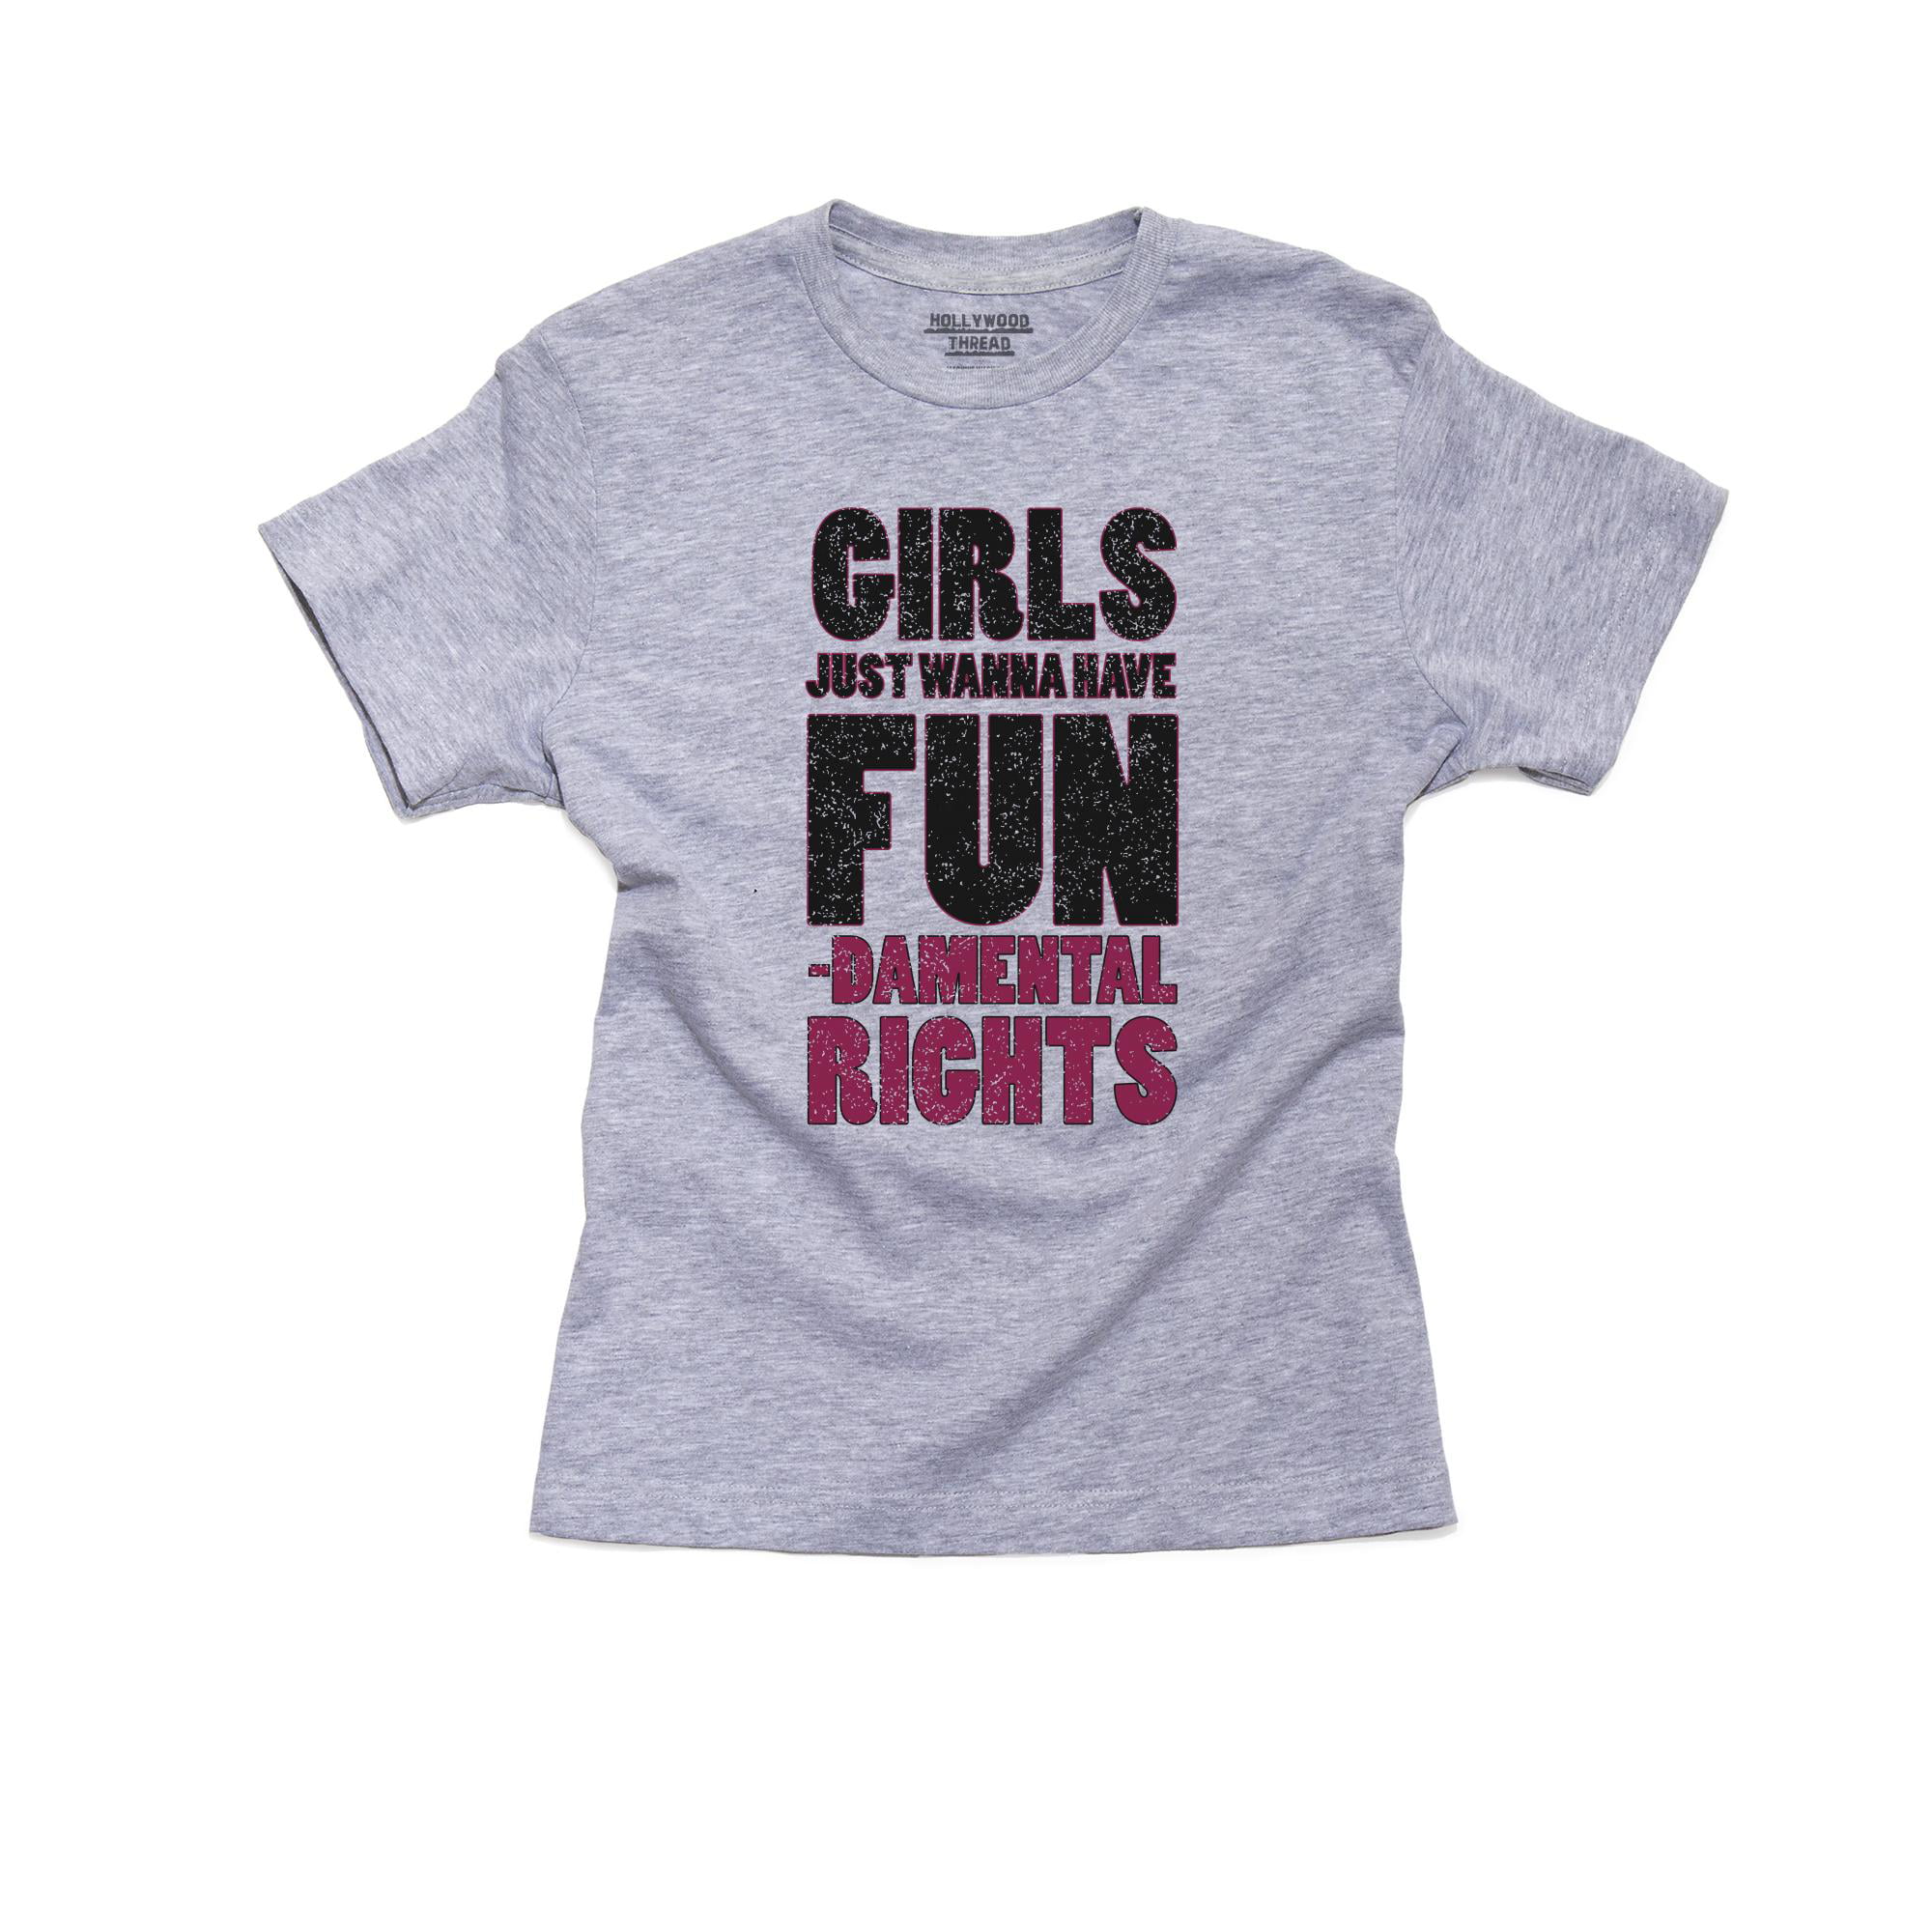 Girls Just Wanna Have Funds Funny Cute Kids Sweater Jumper Boys Girls